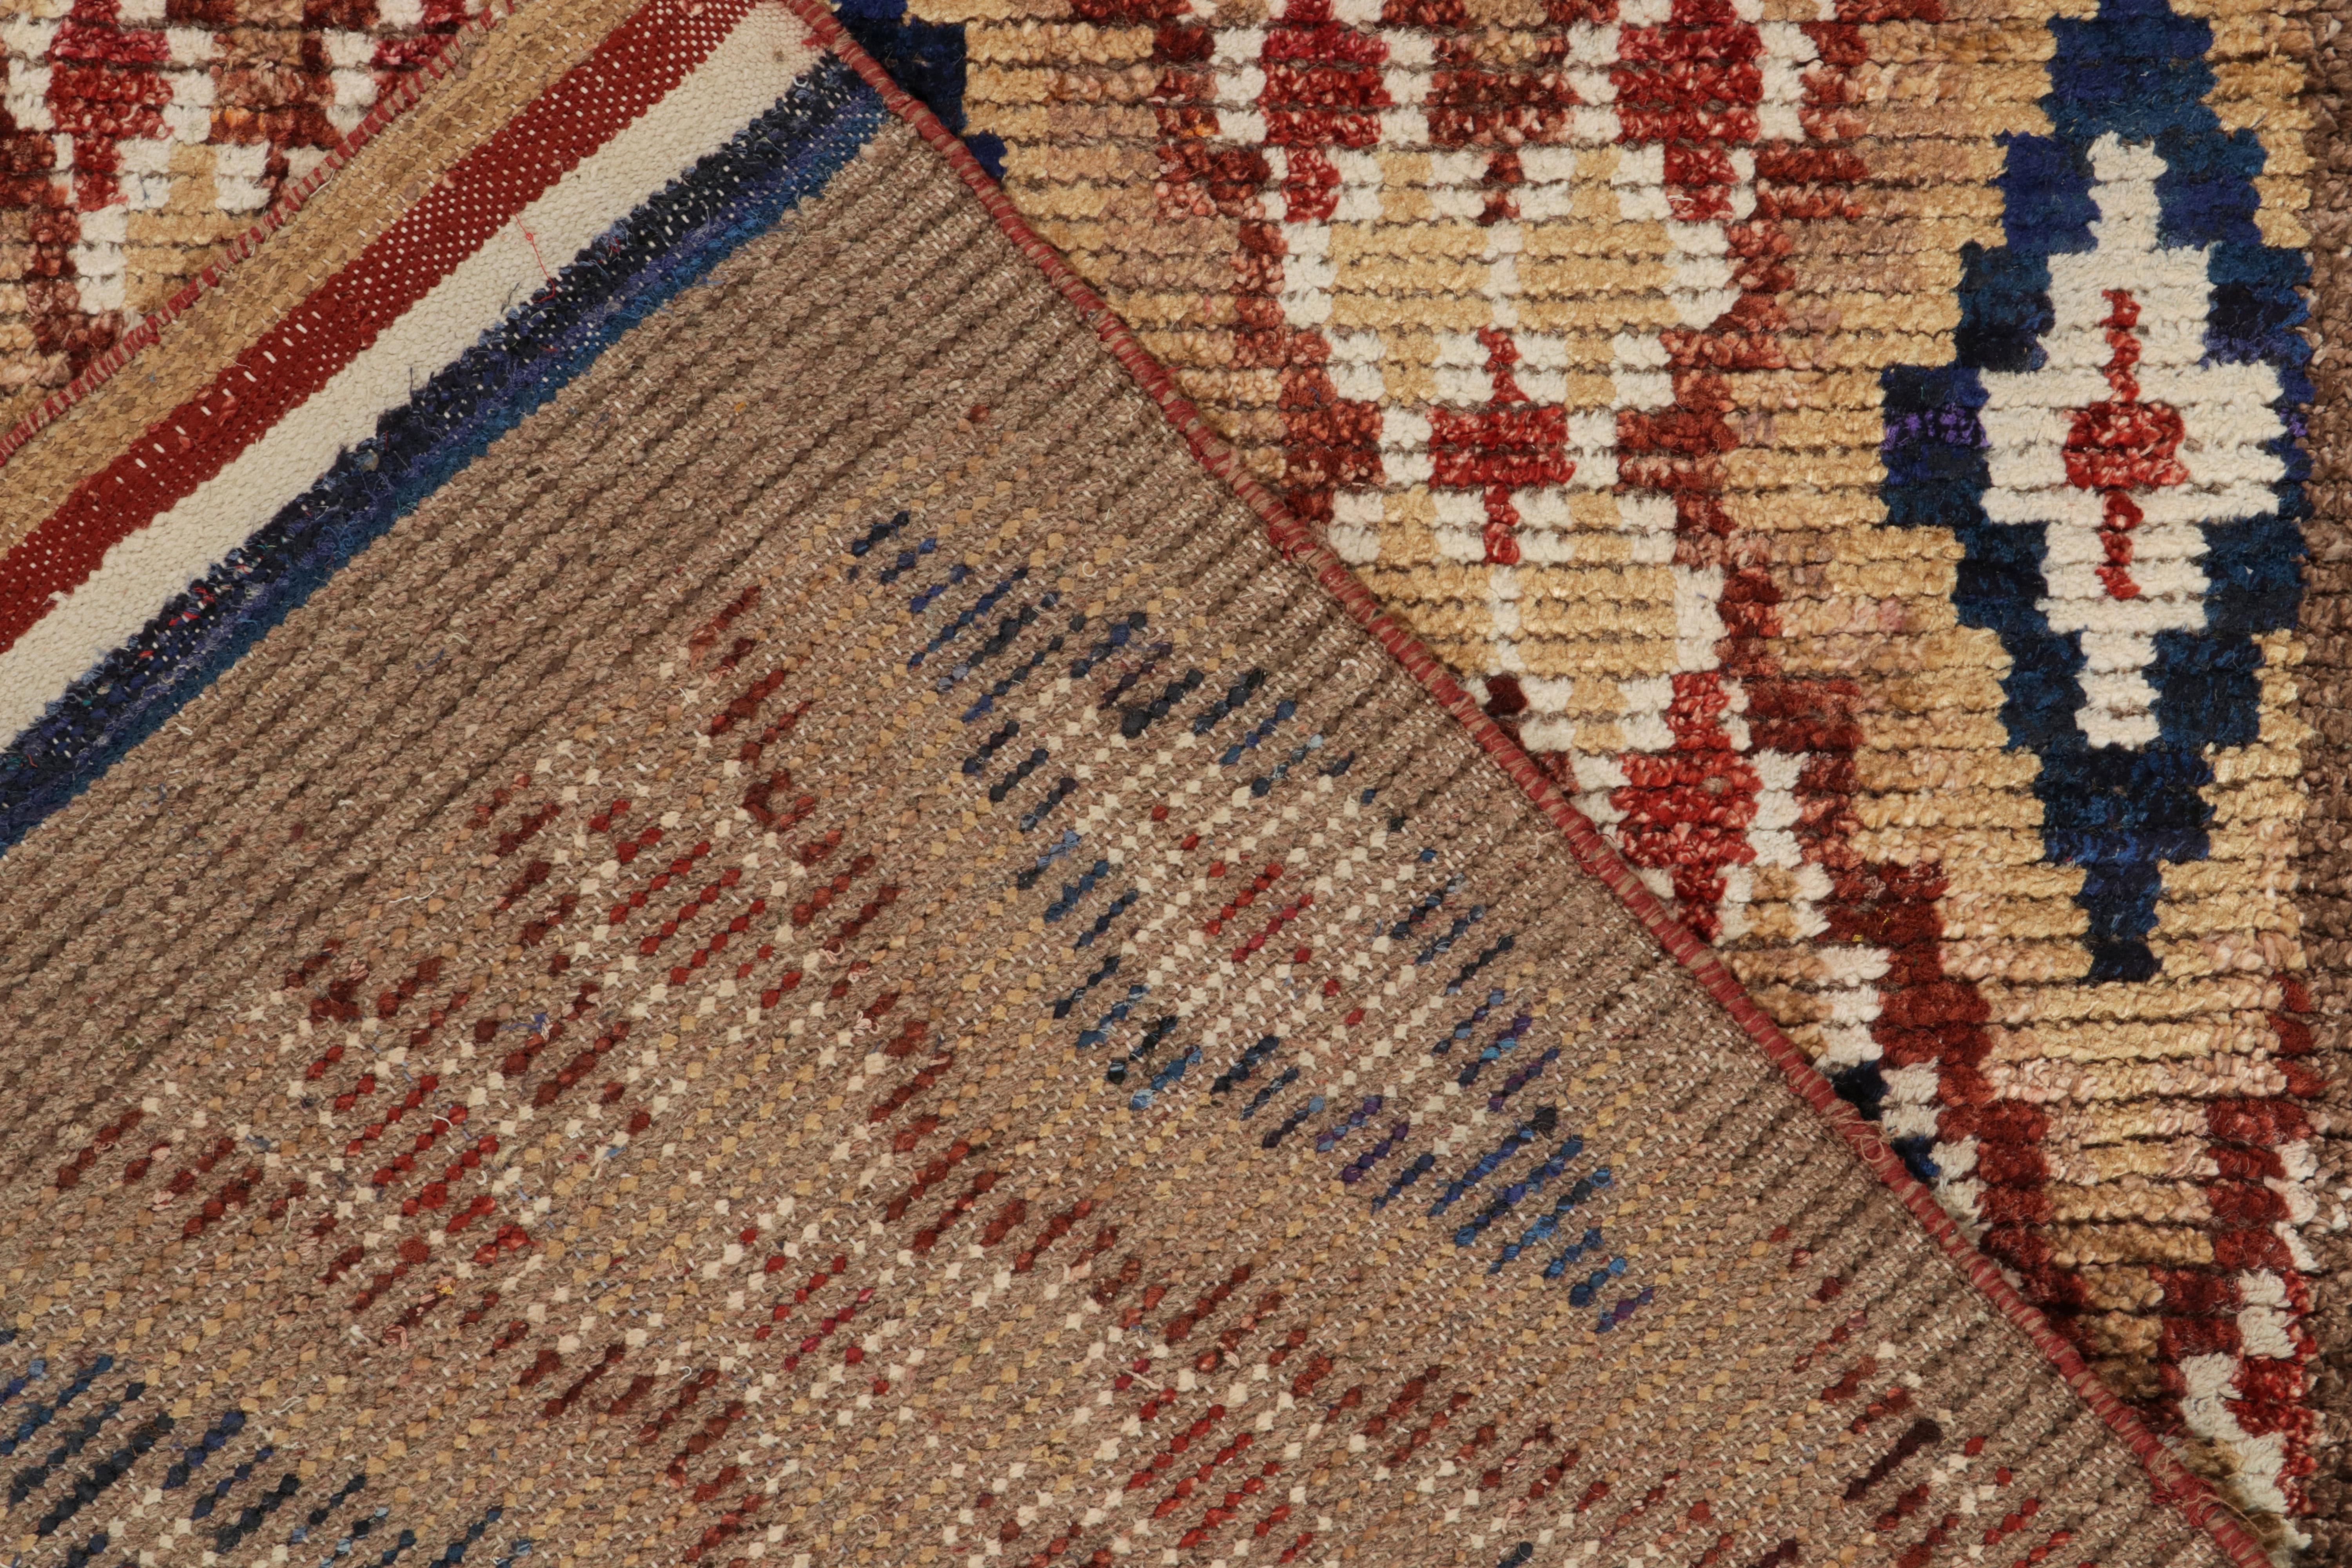 Contemporary Rug & Kilim's Moroccan Style Rug in Beige-Brown, Red and Blue Diamond Patterns For Sale